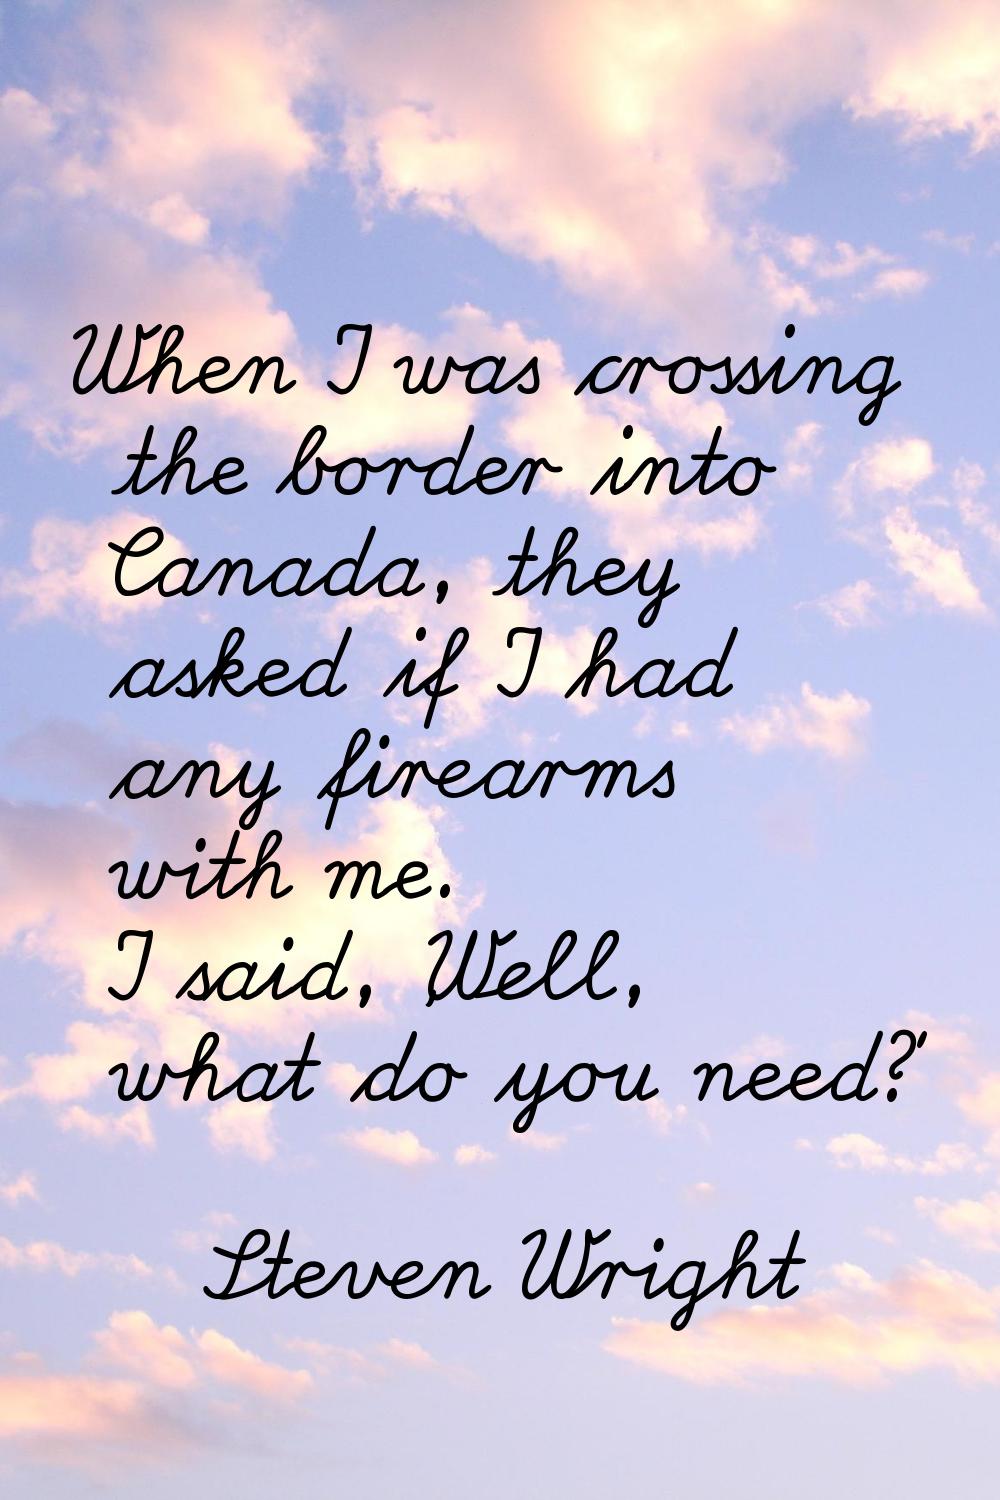 When I was crossing the border into Canada, they asked if I had any firearms with me. I said, 'Well